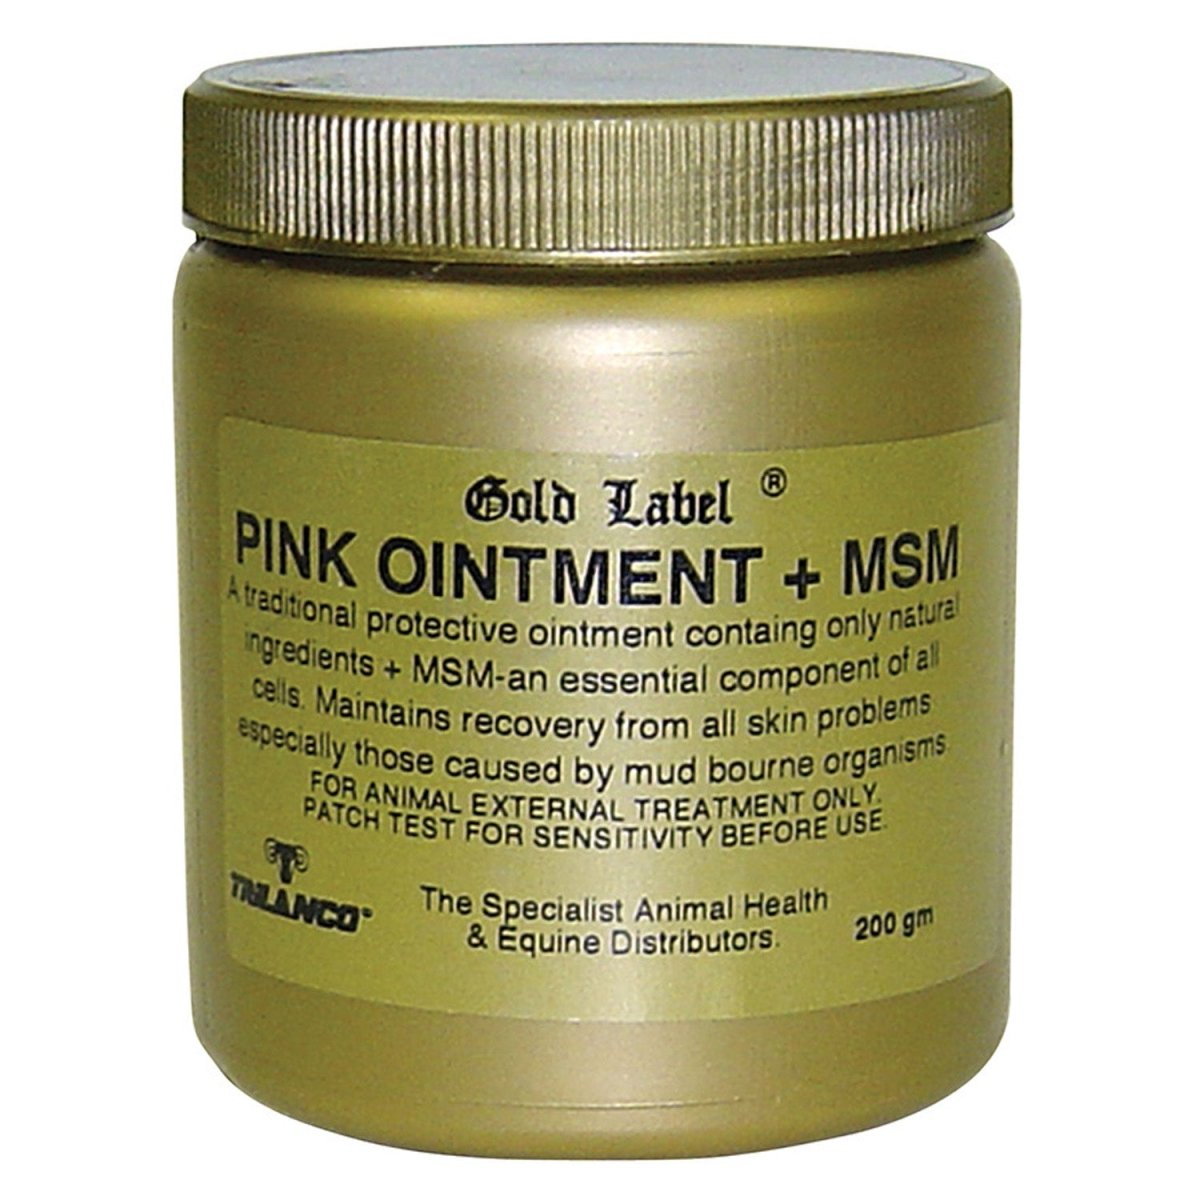 Gold Label Pink Ointment + Msm - 200Gm -